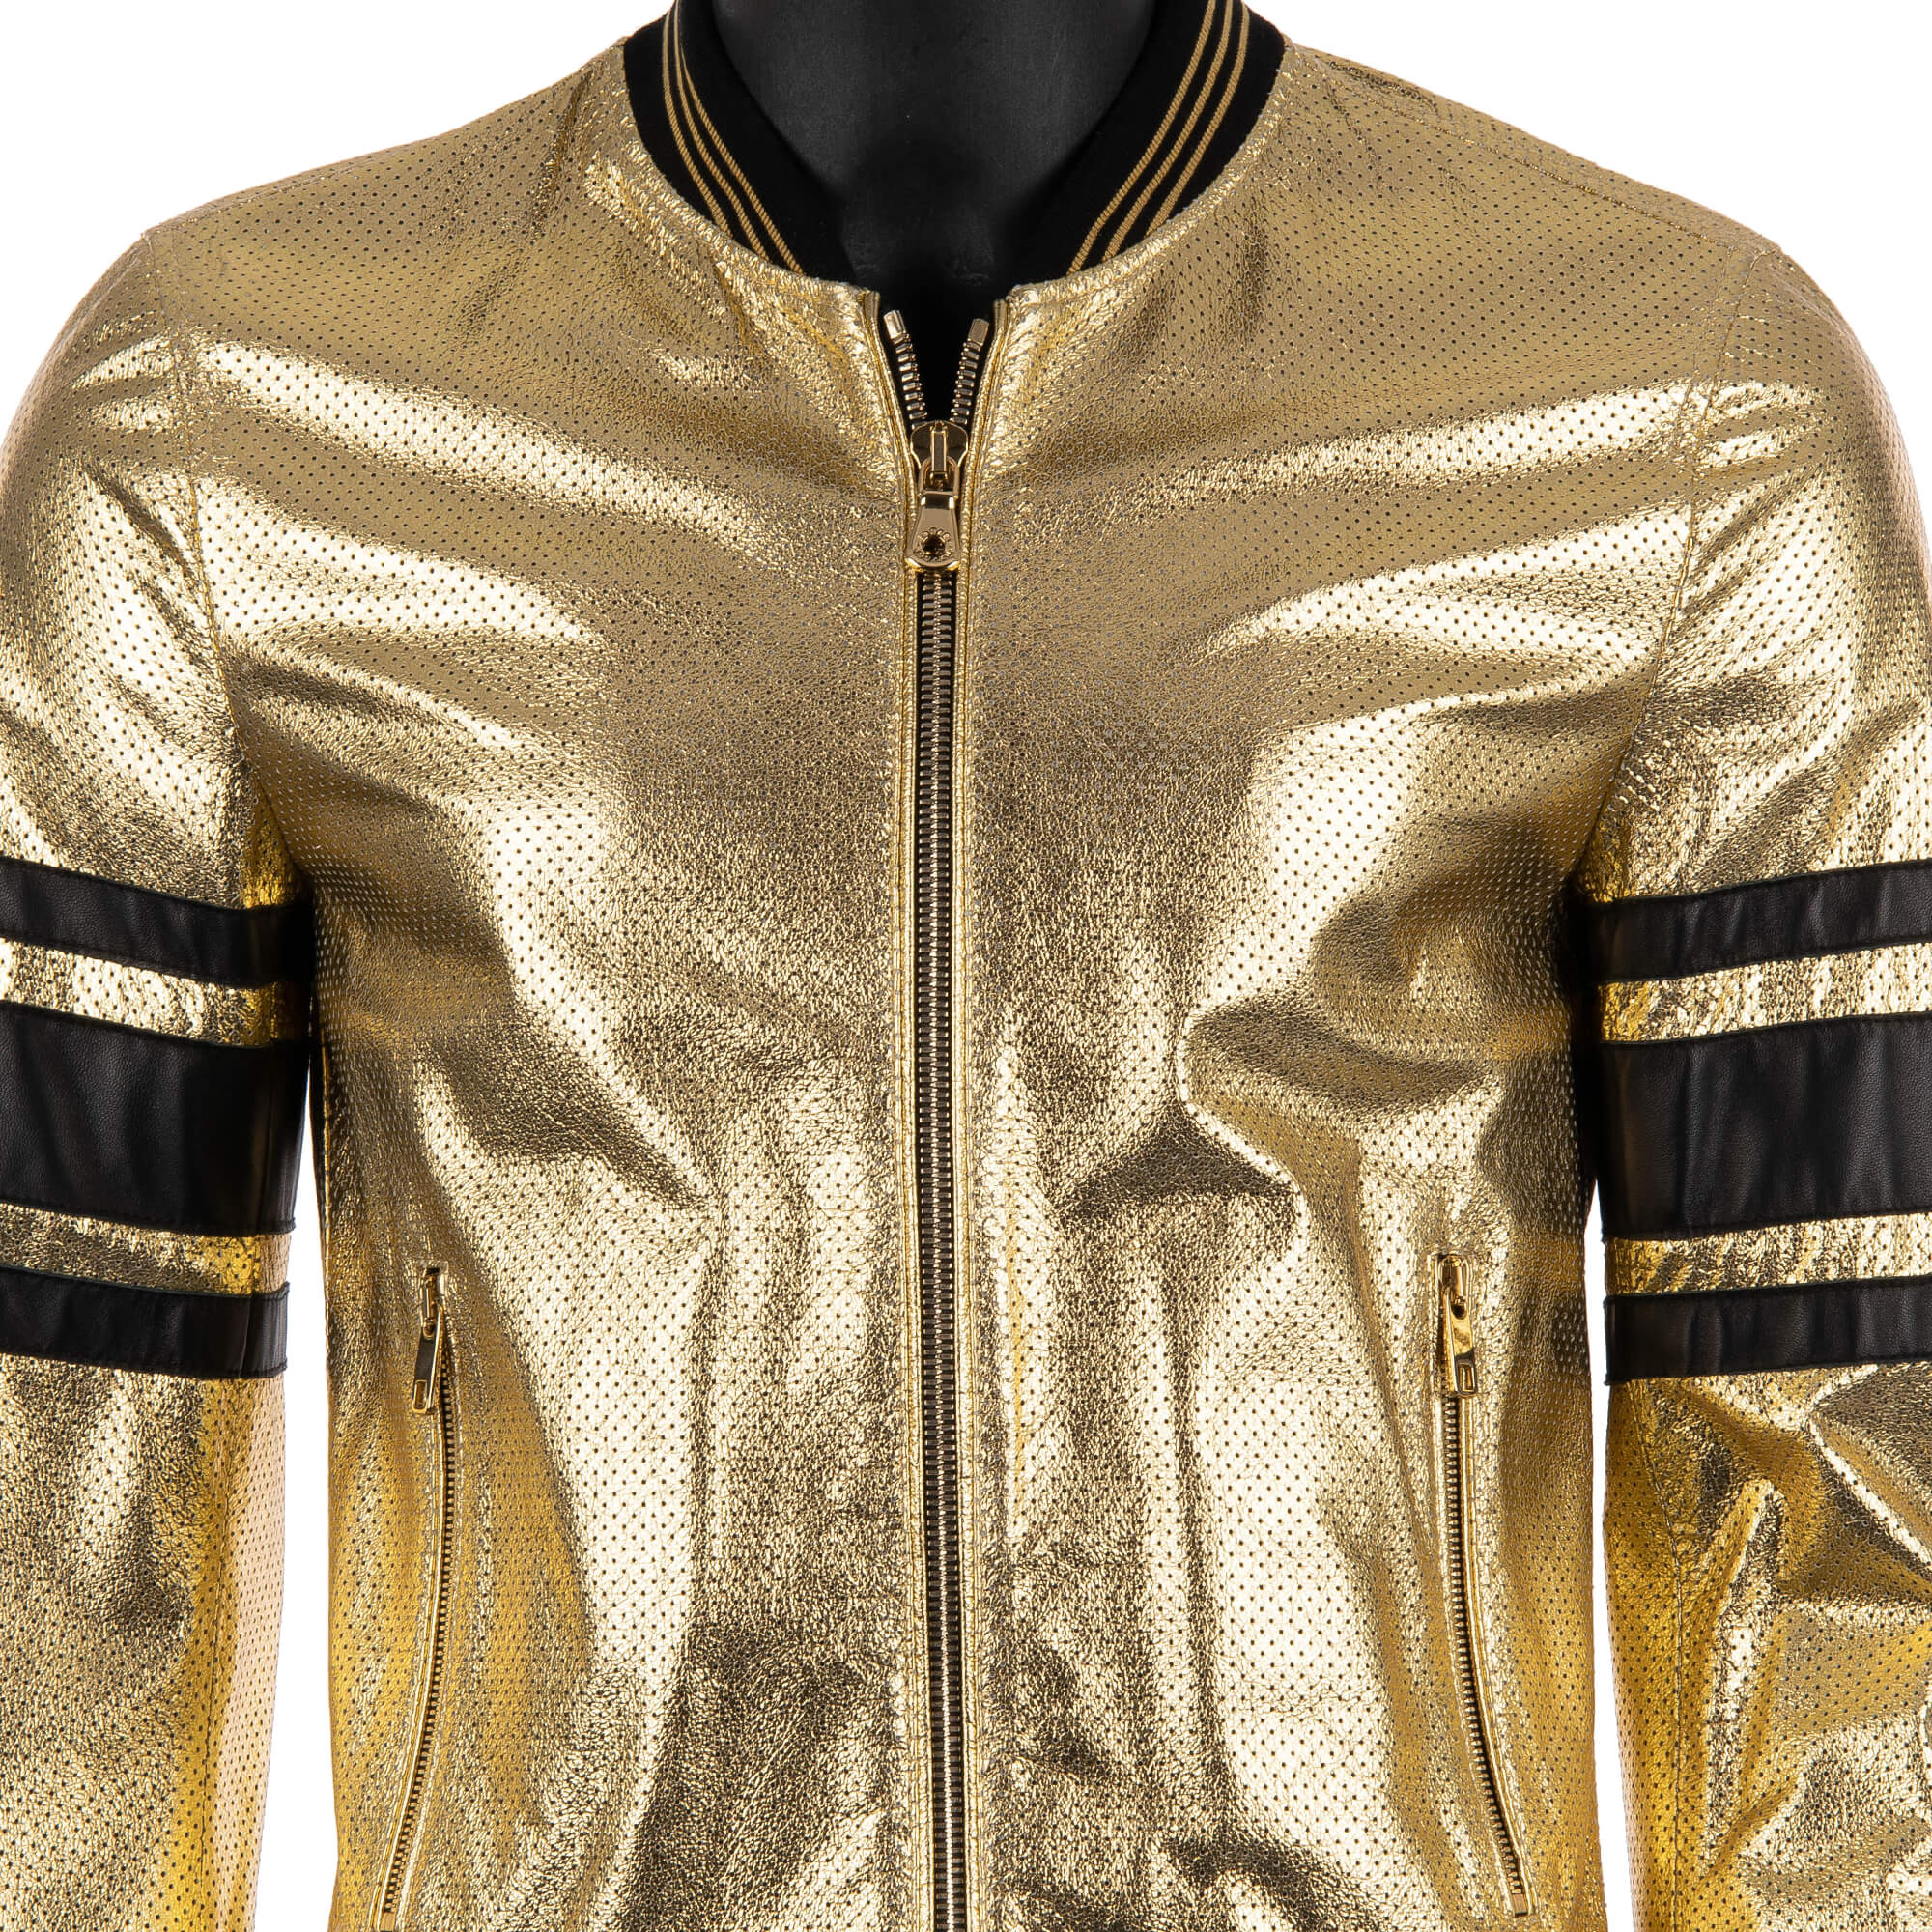 Perforated Leather Jacket Gold Black